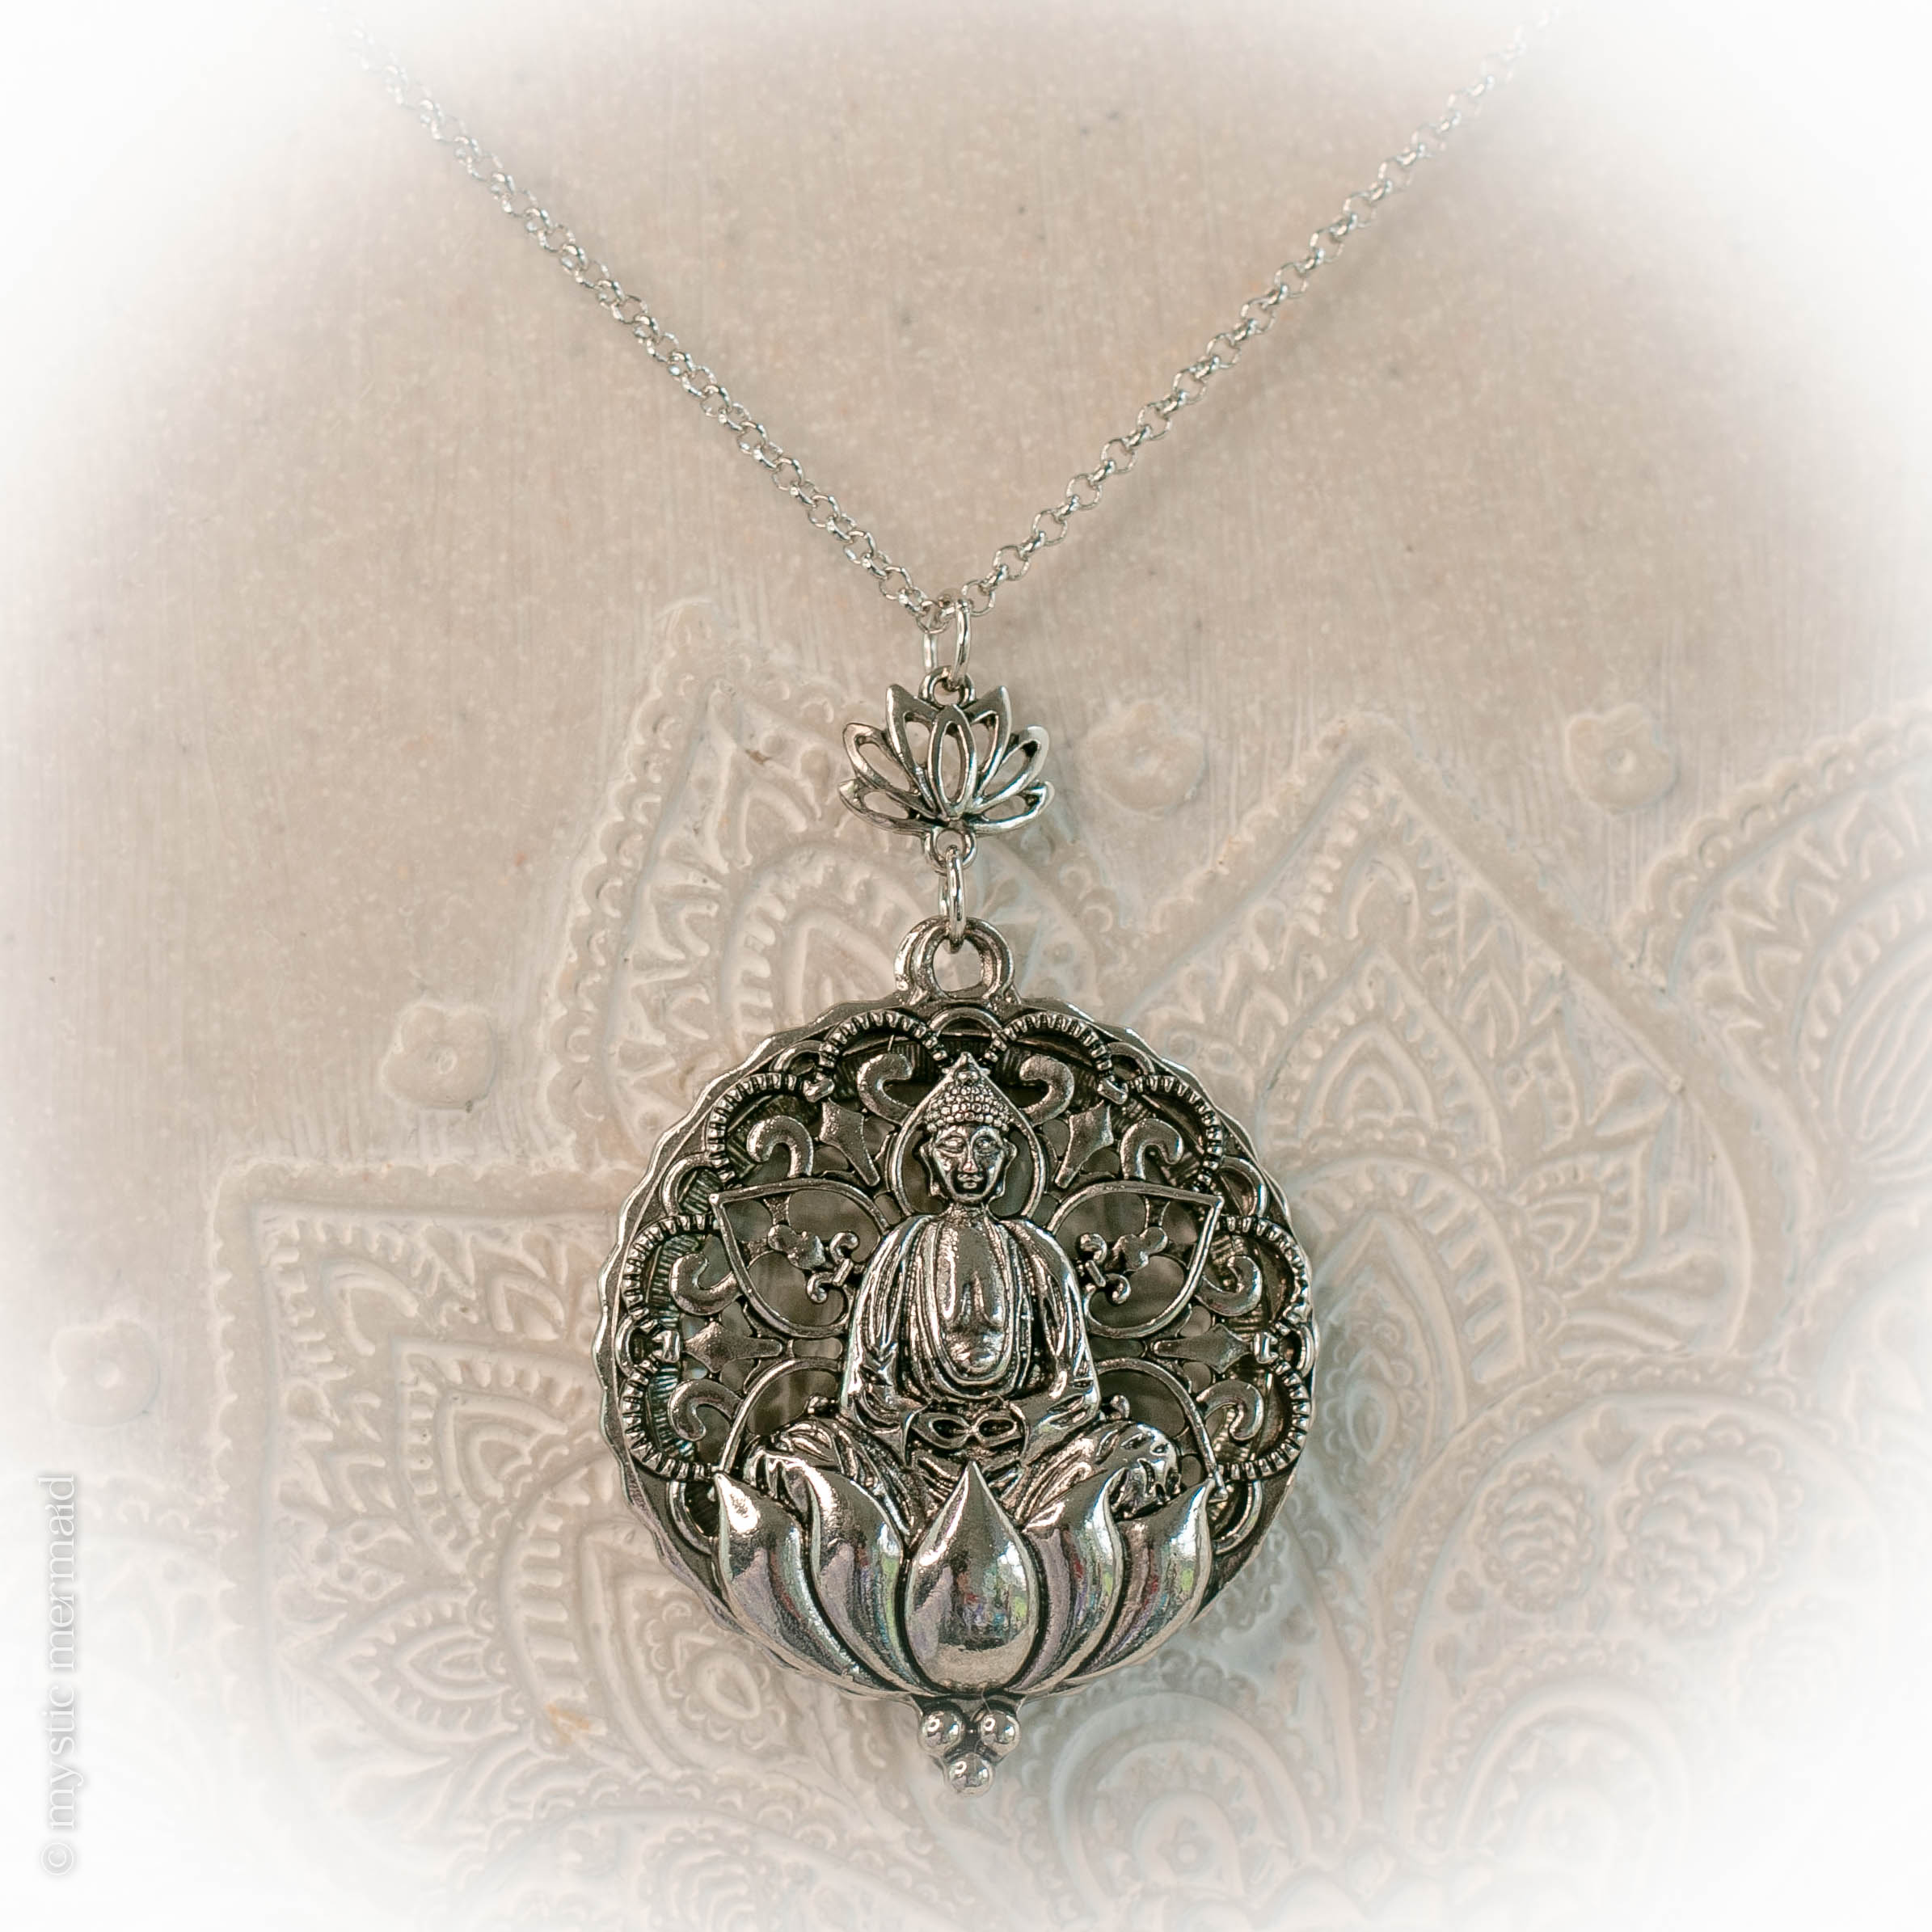 Buddha's Bliss Magnifying Glass Necklace